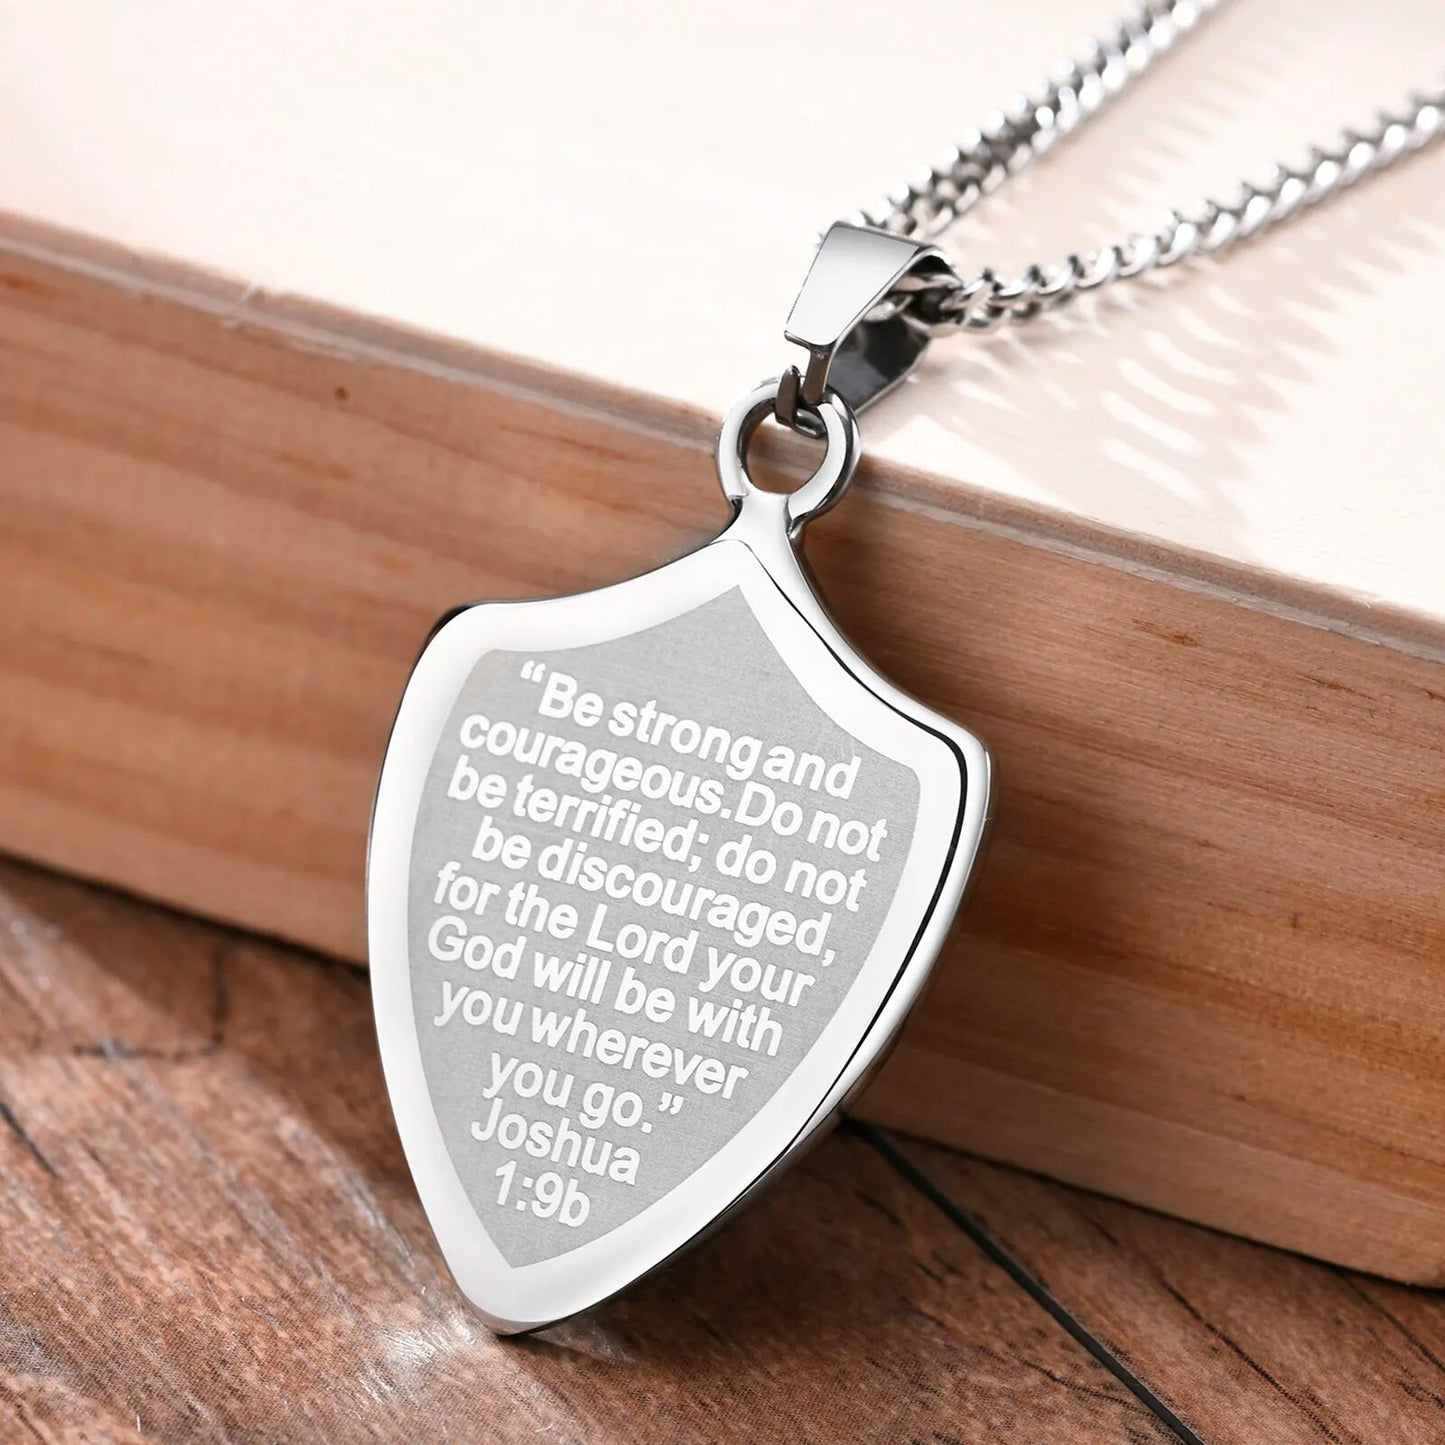 Men Shield Shape Cross Pendant Necklace in Stainless Steel Be Strong and Courageous Bible Verse Christian Jewelry